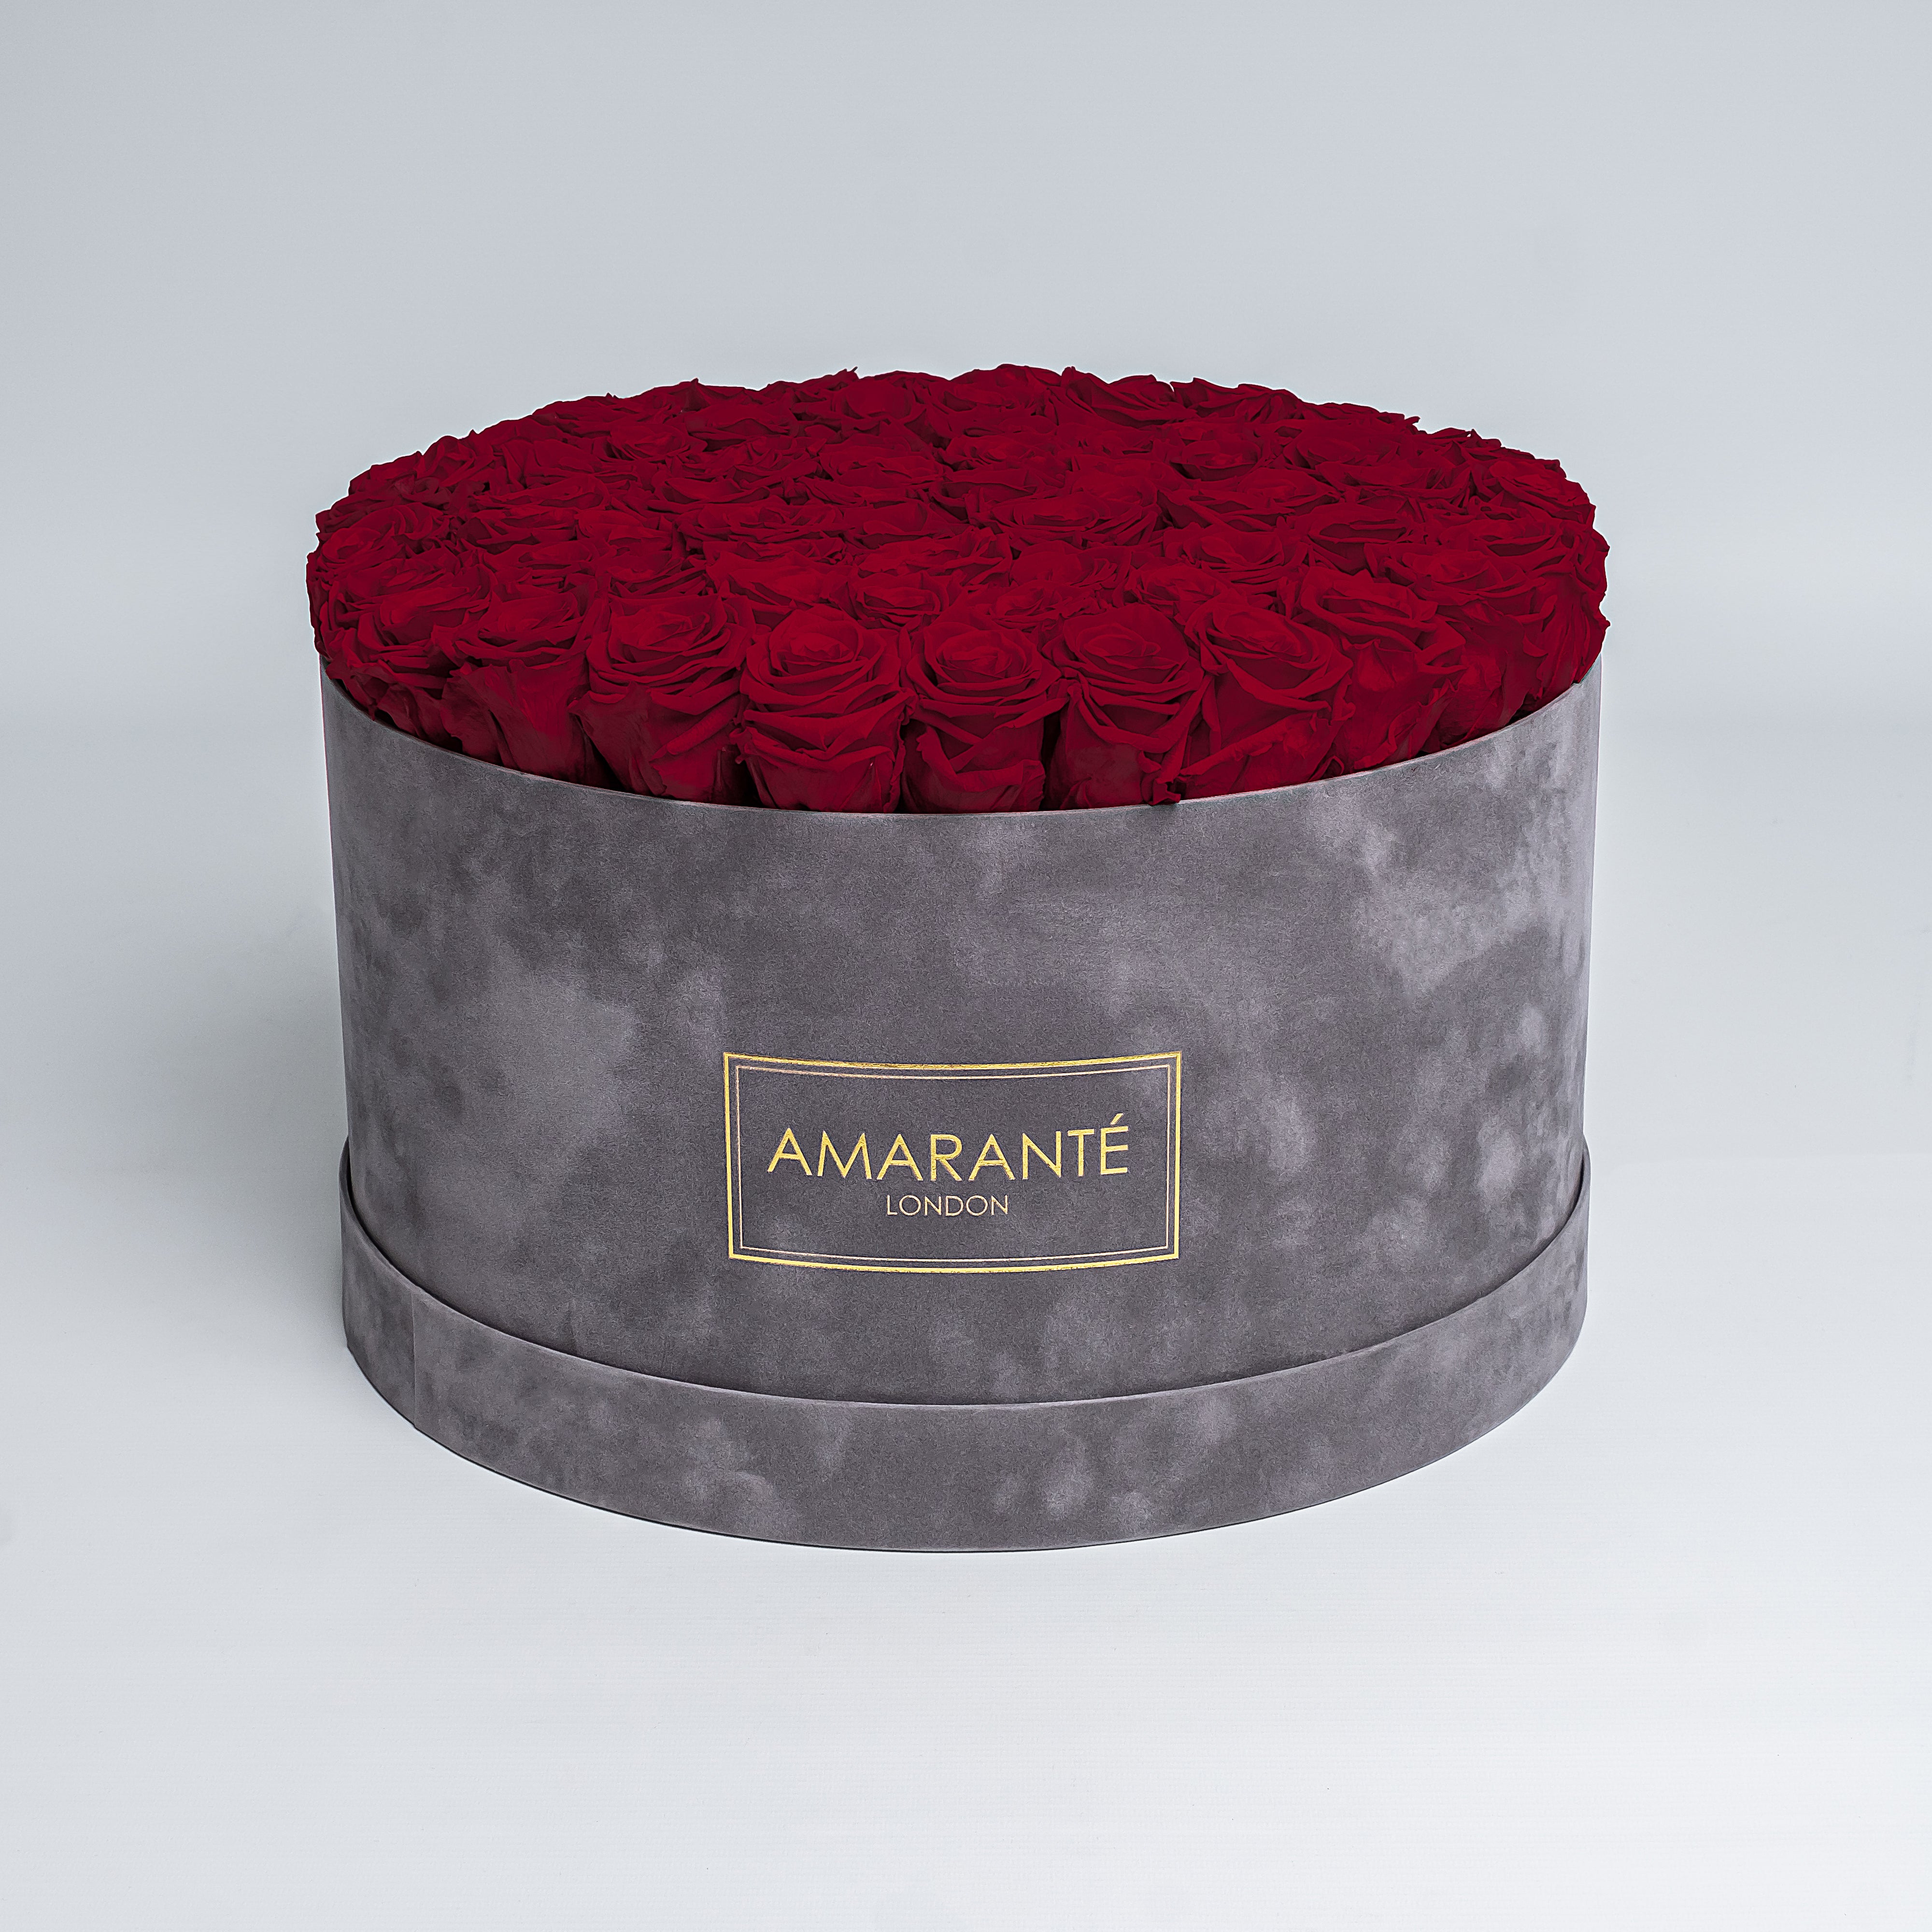 Elegant deep red Infinity Roses artistically arranged in a trendy round grey suede rose box. Free delivery in the UK. A mesmerising, luxurious gift, perfect for showing timeless love and affection to family, friends, or your significant other on Valentine's Day, Birthday, Anniversary, or other important occasion.